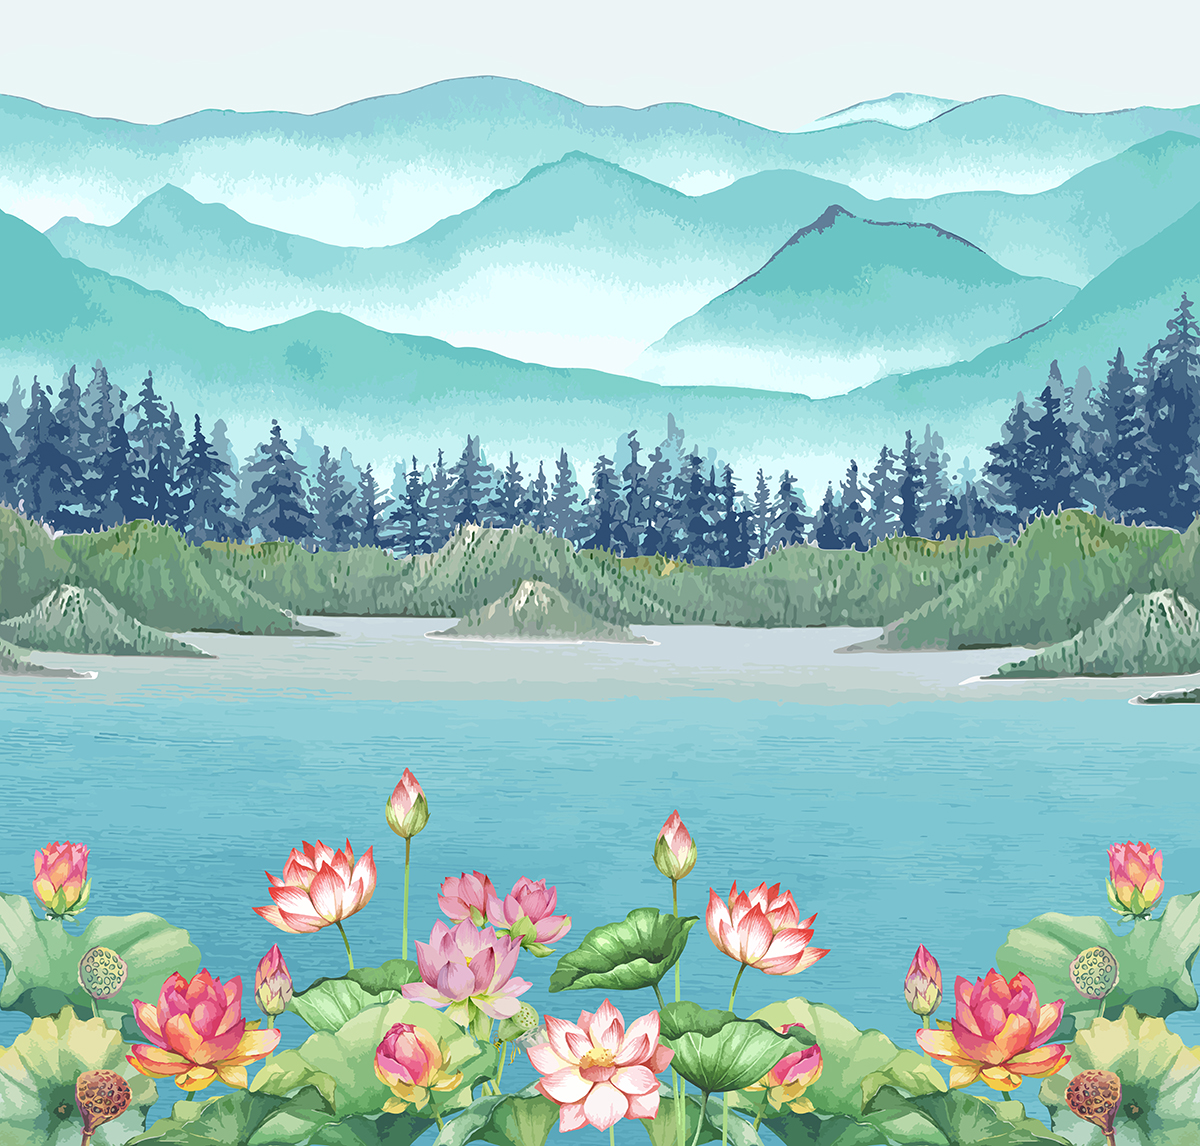 A water with flowers and mountains